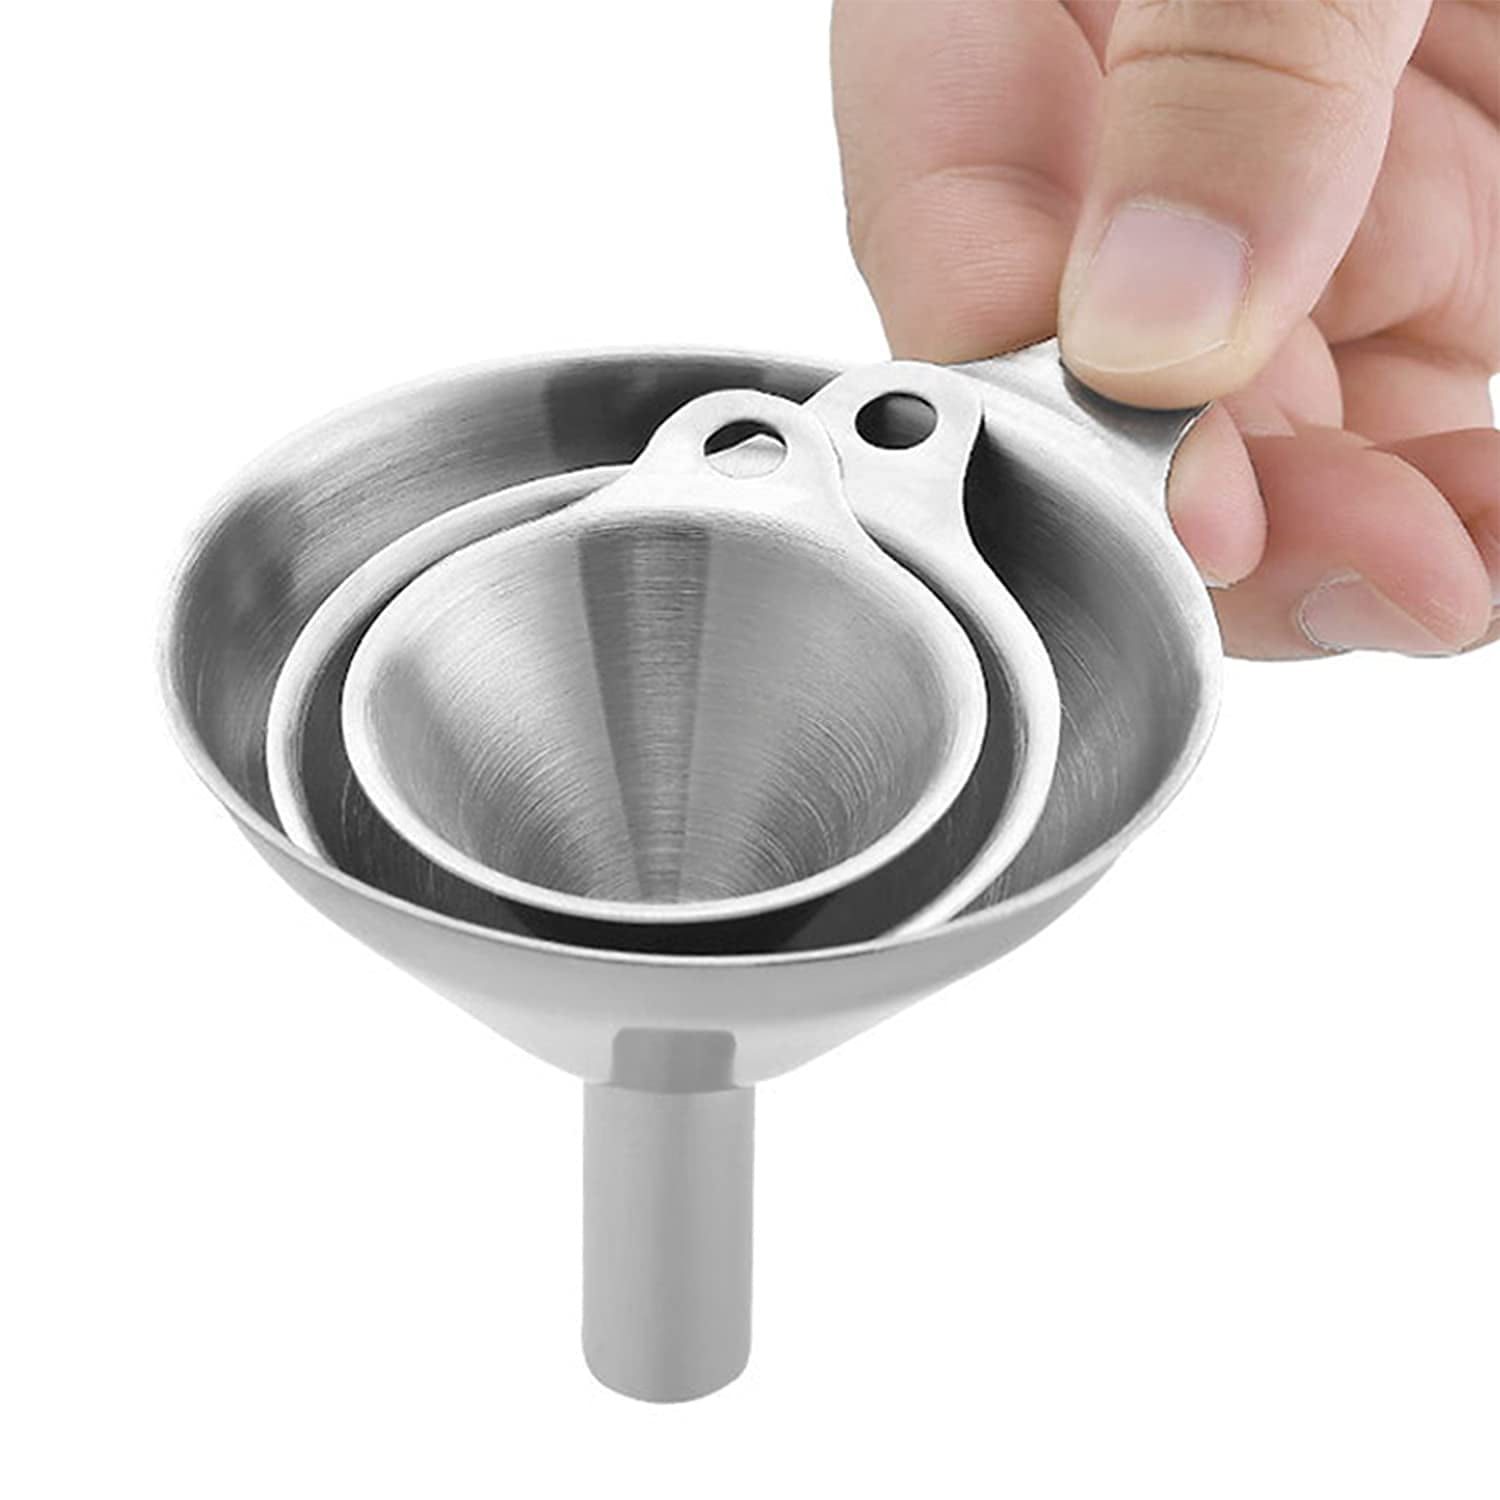 Yevior Metal Funnels for Filling Bottles Stainless Steel Small Kitchen Funnel Set for Transferring Essential Oils Liquid Fluid Spice Dry Ingredients